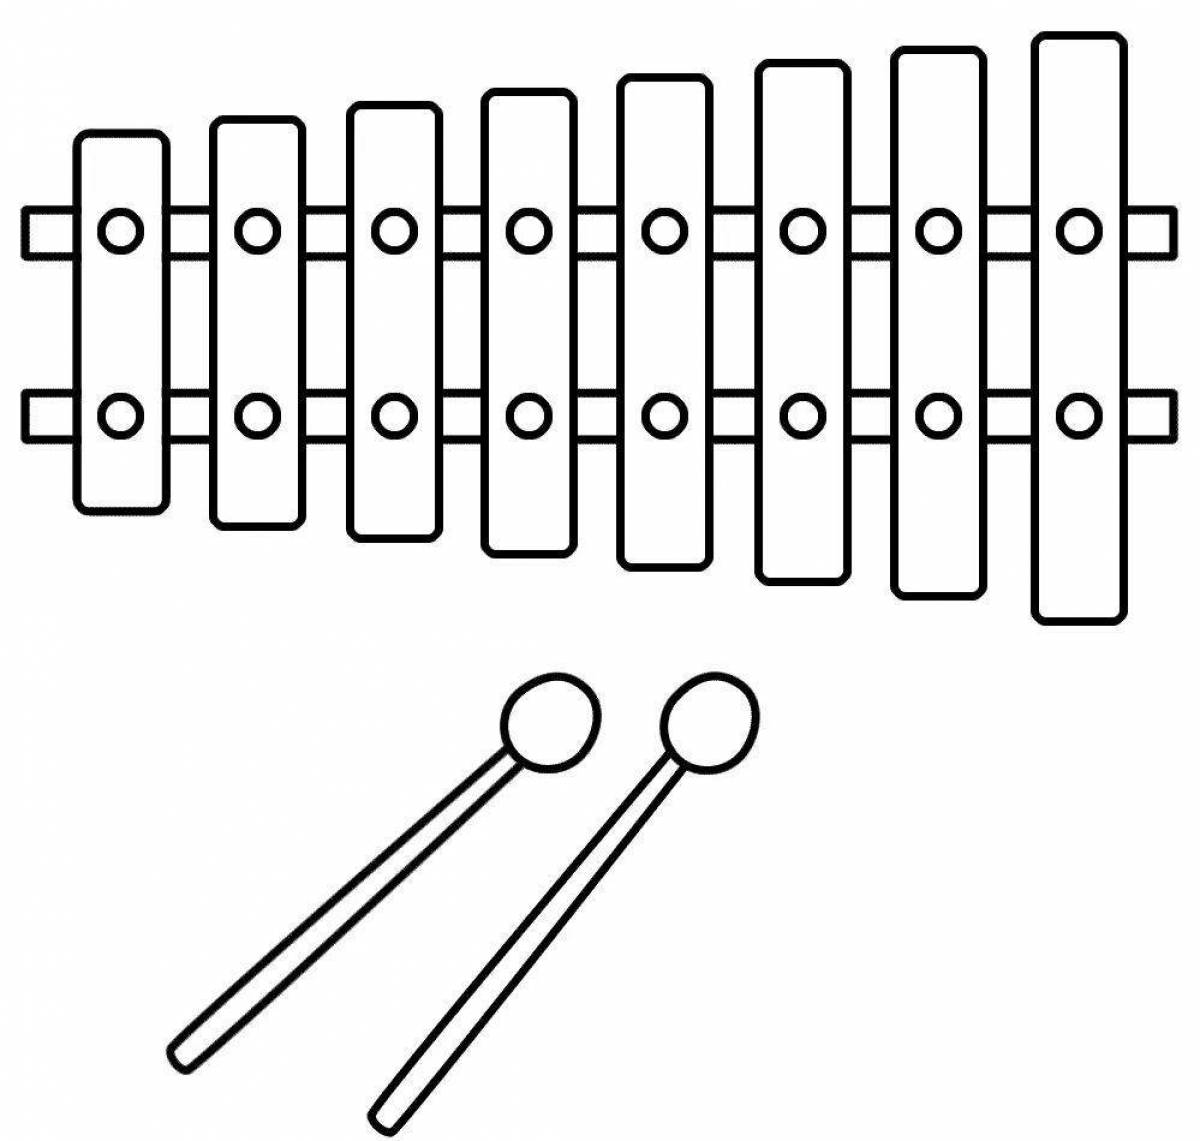 Xylophone stylish coloring page